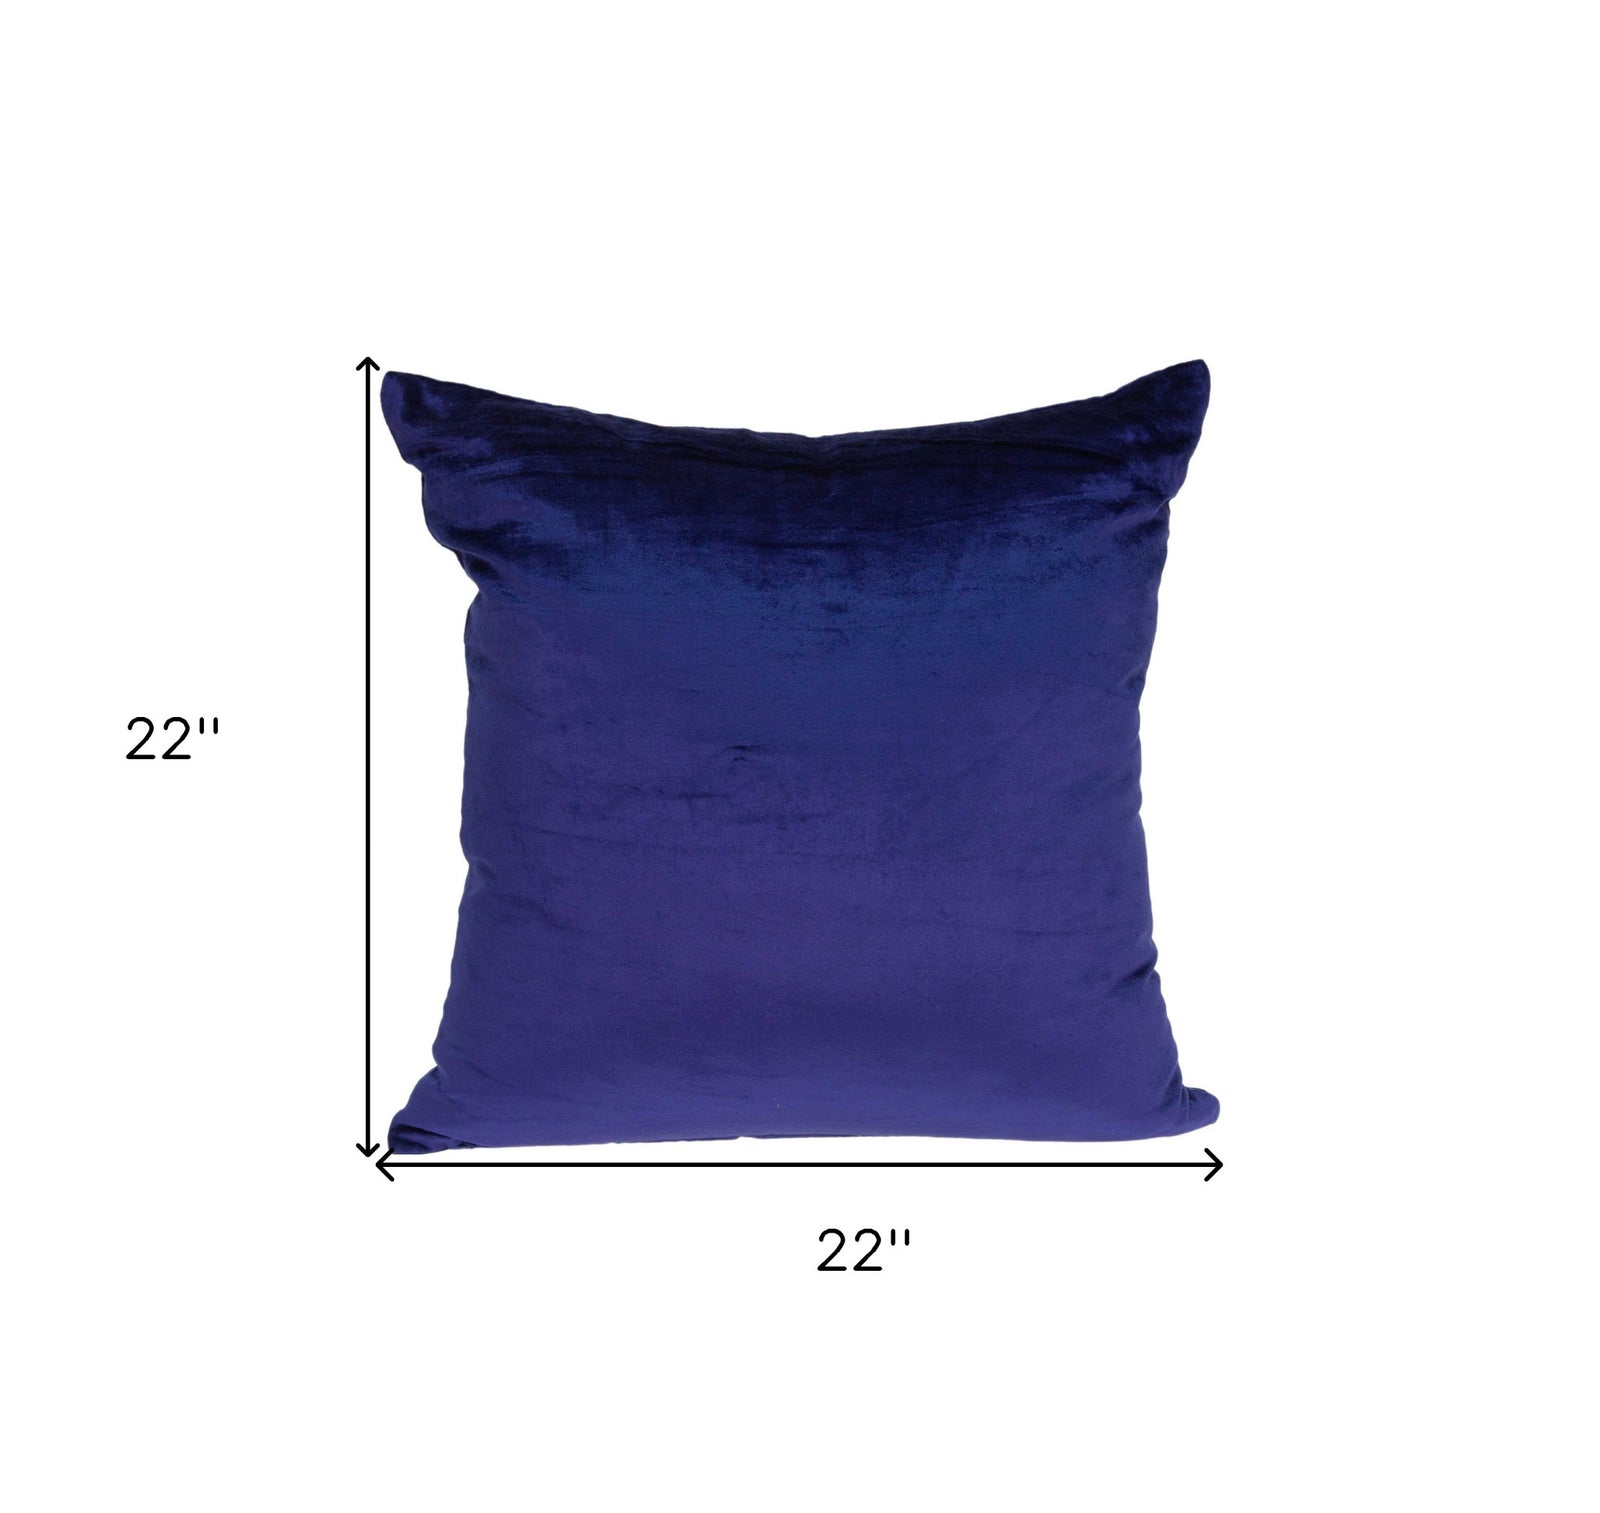 22" X 7" X 22" Transitional Royal Blue Solid Pillow Cover With Poly Insert